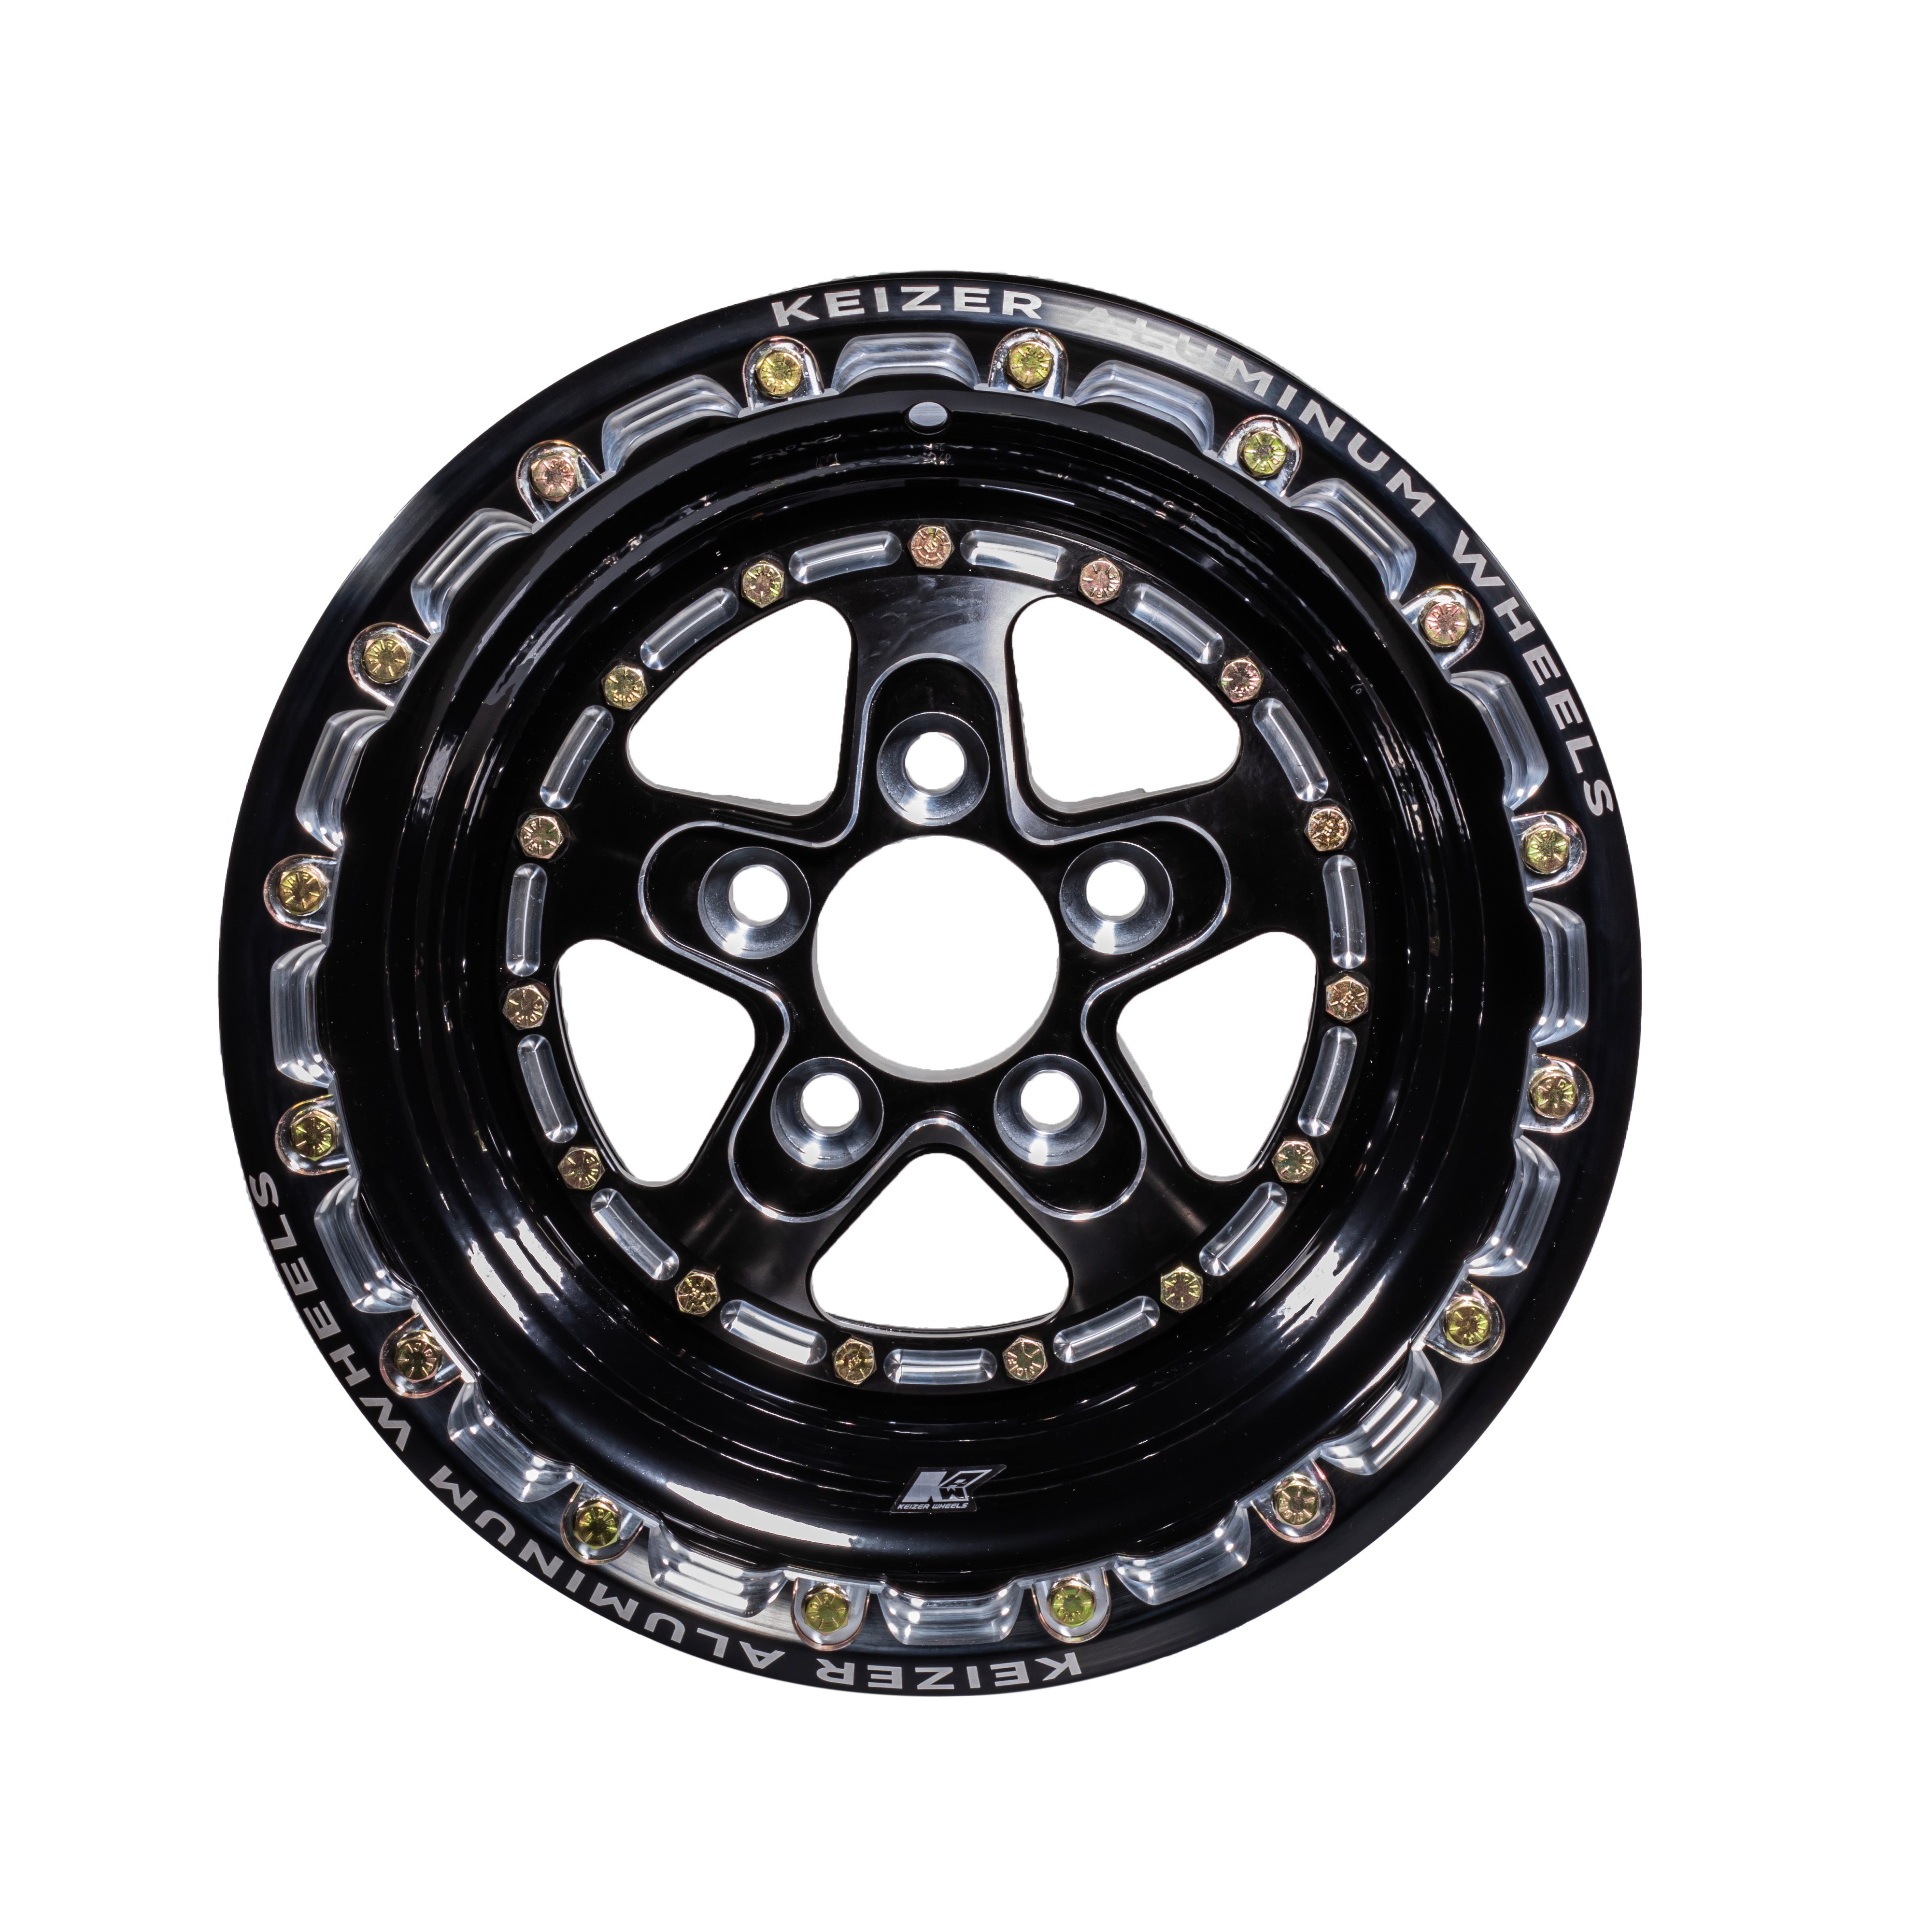 KEIZER FULL HOUSE FORGED (REAR) Synergy WHEEL Raceparts 